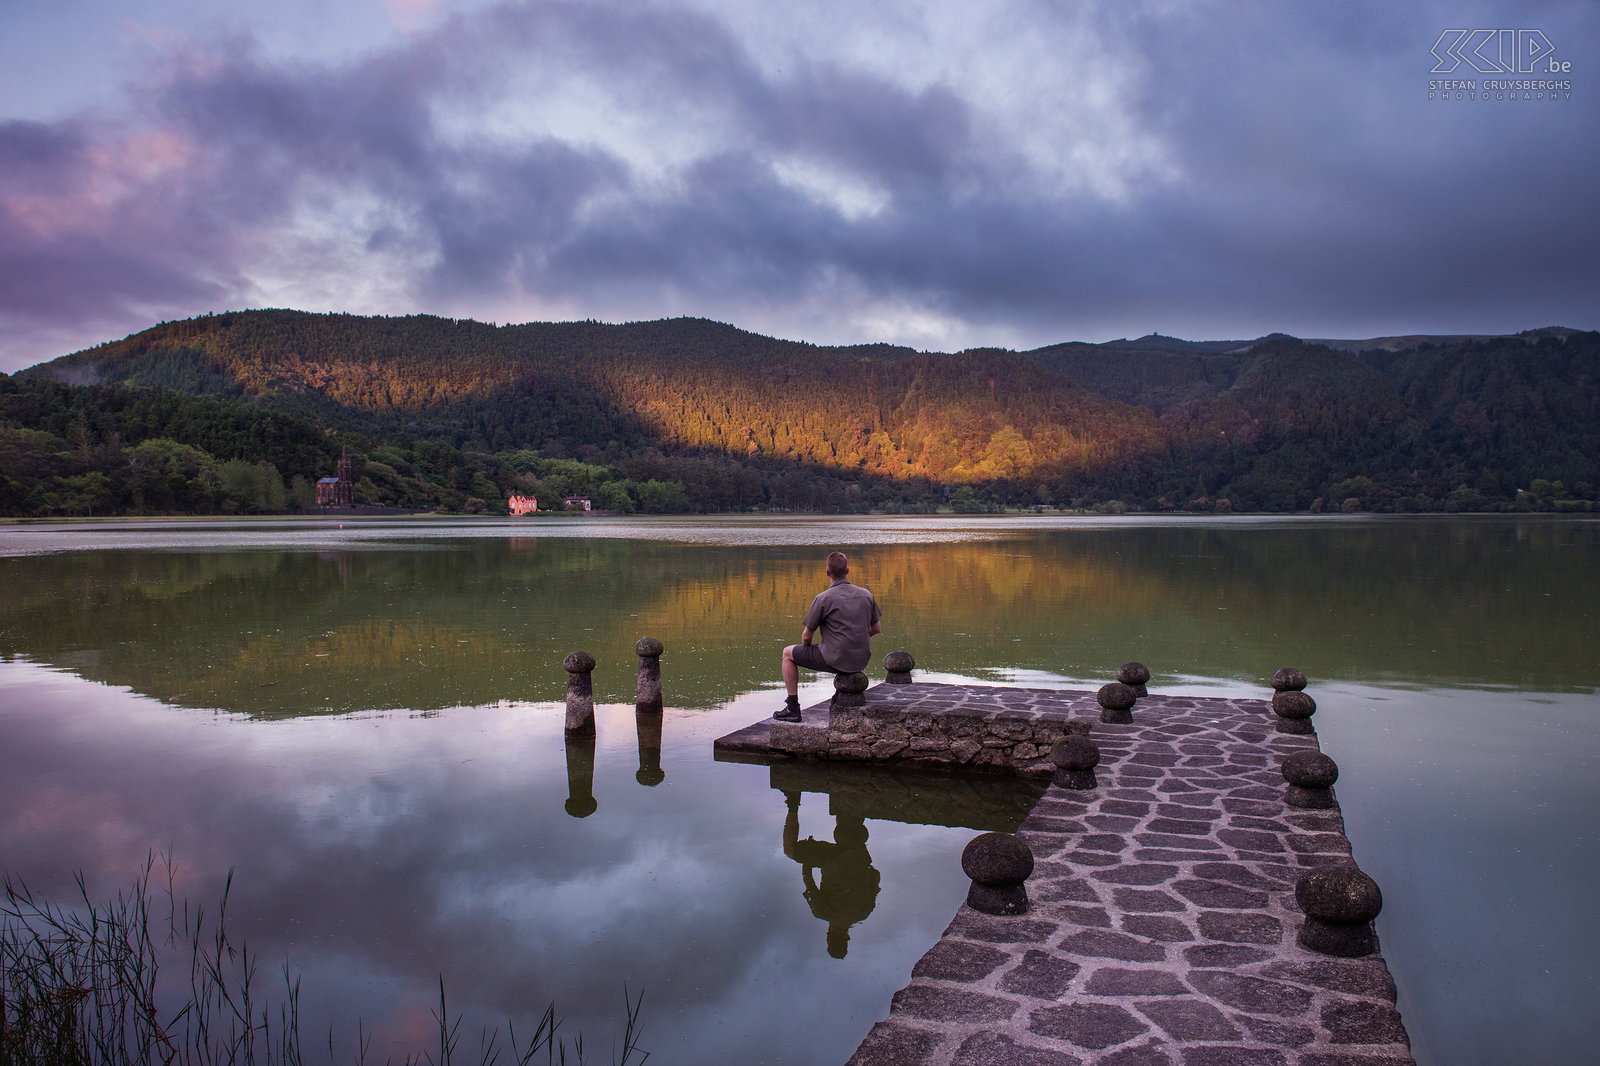 Lagoa das Furnas - Stone pier Selfie during sunrise at the stone pier in Lake Furnas at the island of São Miguel. Lagoa das Furnas is a crater lake and nearby are 2 calderas. Furnas is located in one of three active trachytic volcanoes on the island of São Miguel. Across the lake is the neo-Gothic Capela de Nossa Senhora das Vitórias (late 19th century), a miniature version of the Cathedral of Chartres. Stefan Cruysberghs